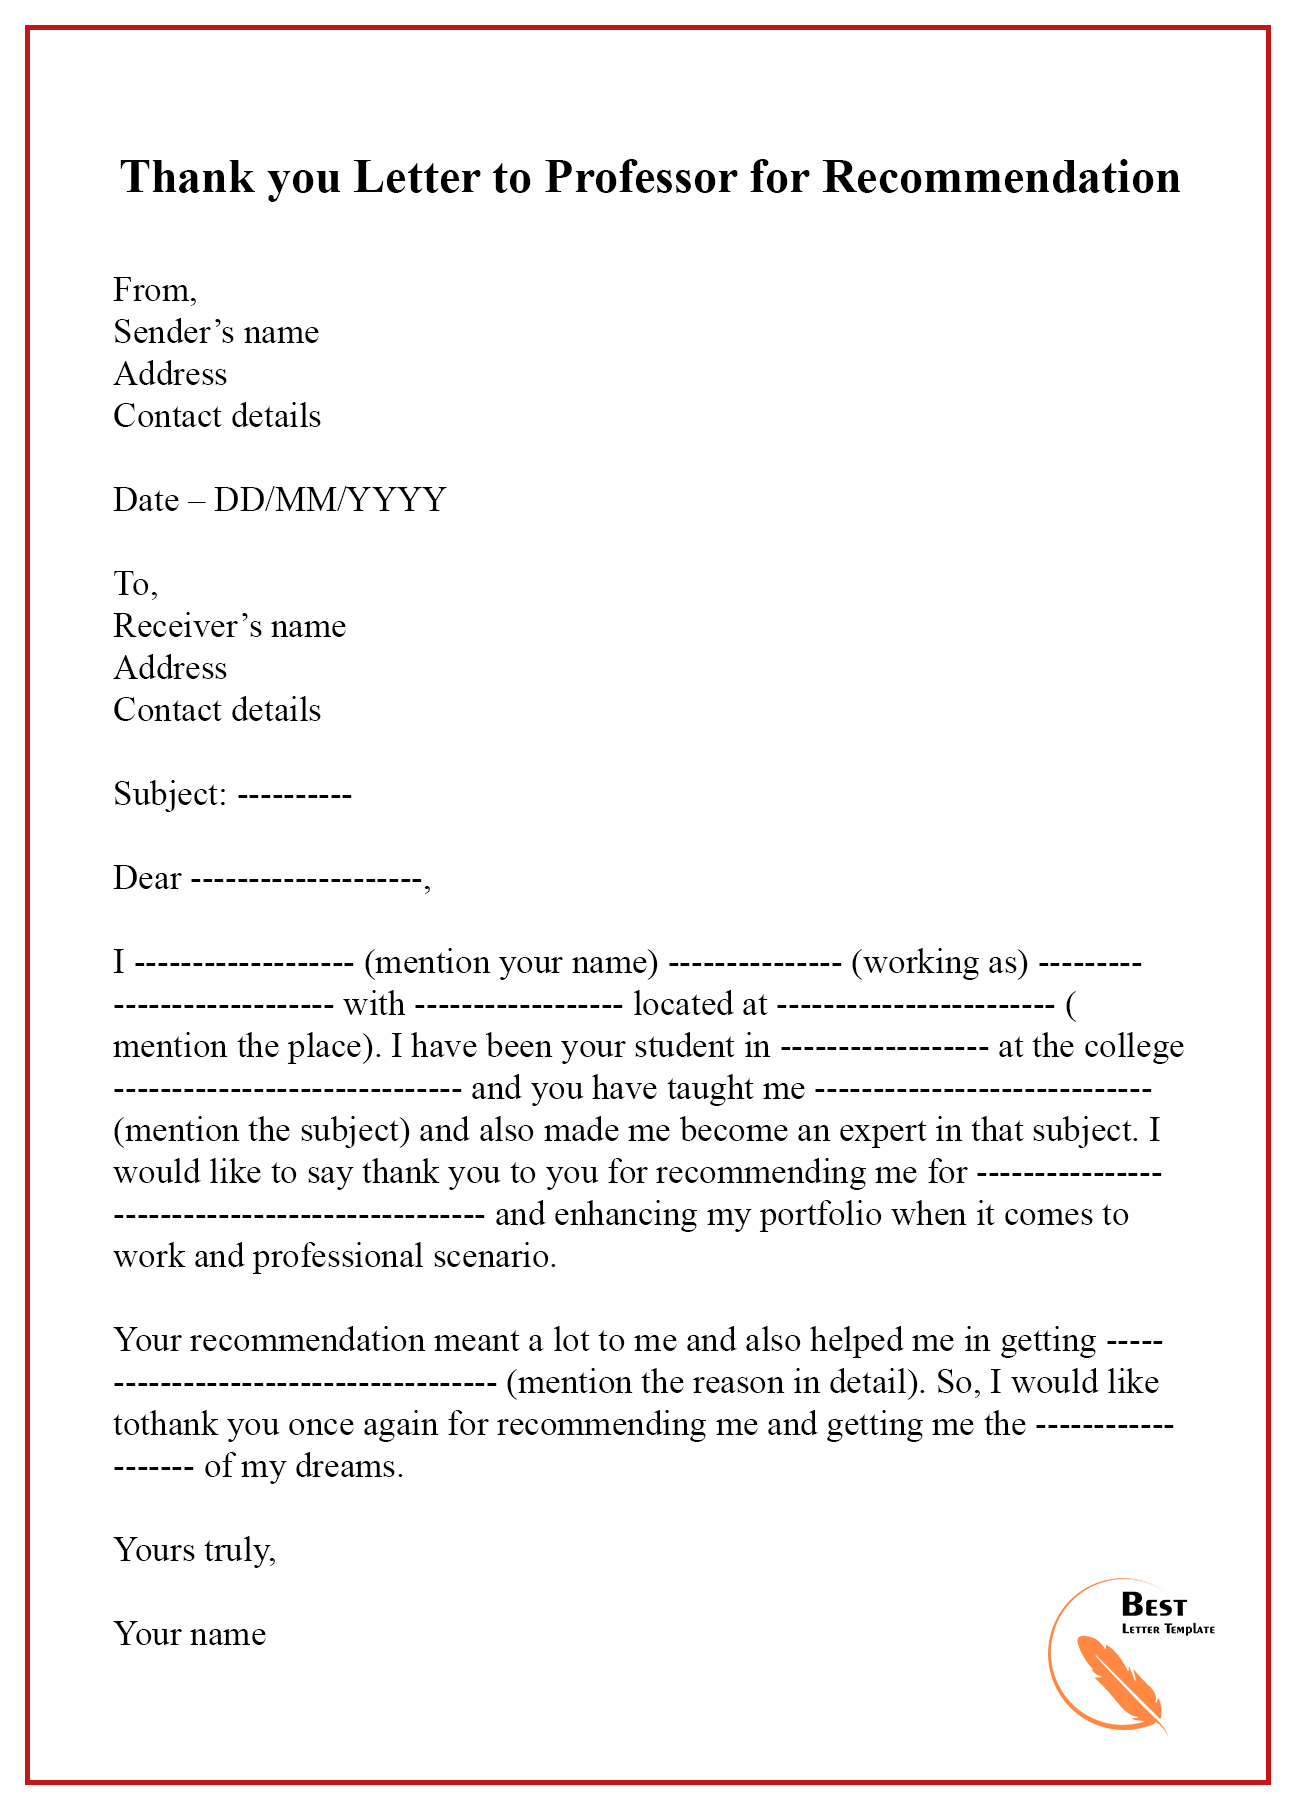 Thank You Letter To Professor For Recommendation from bestlettertemplate.com